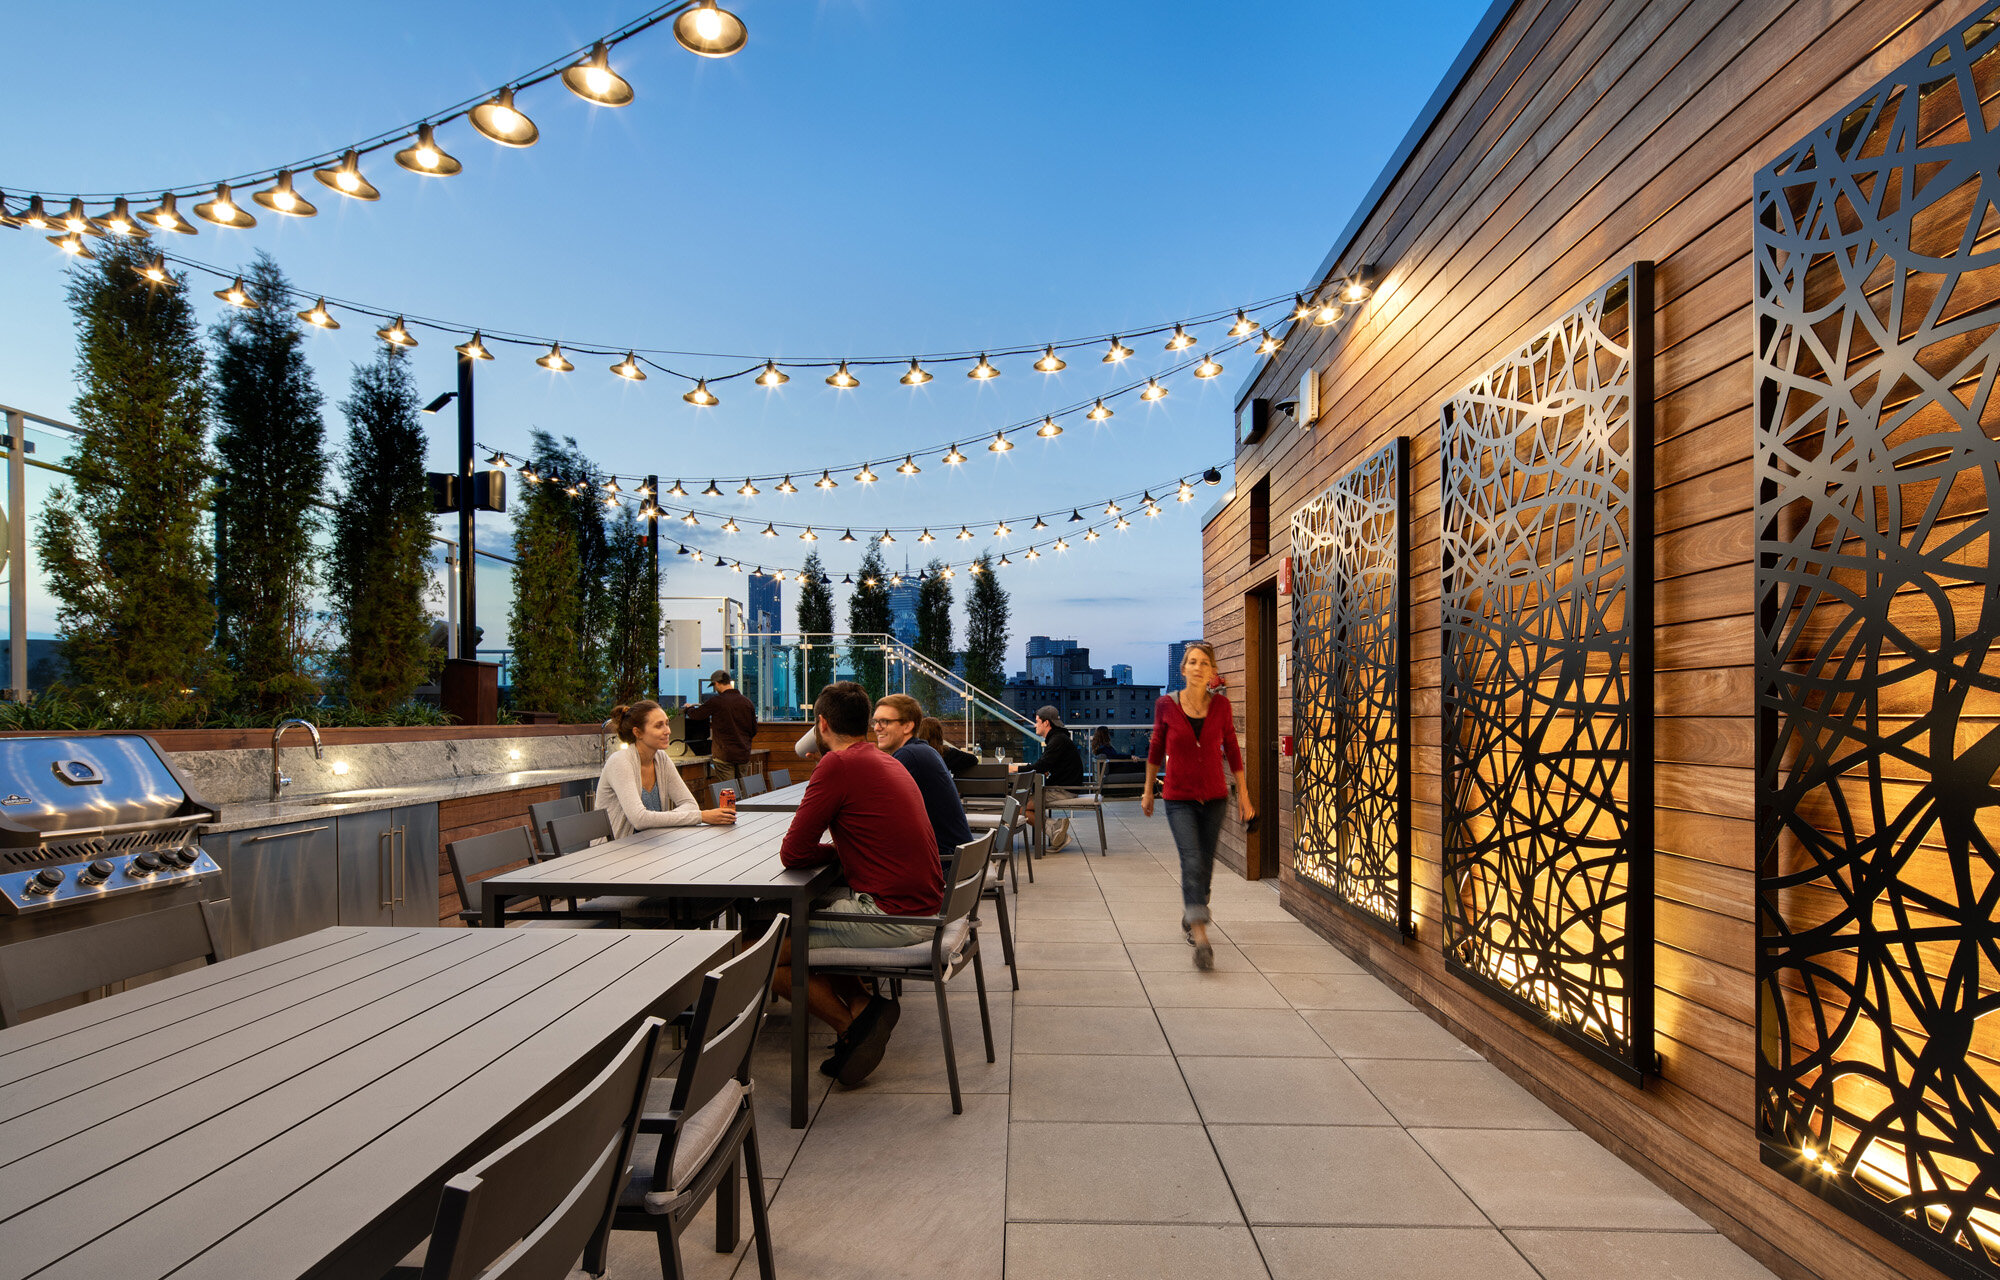  Outdoor kitchen and grill stations at The Smith (photo by Ed Wonsek) 